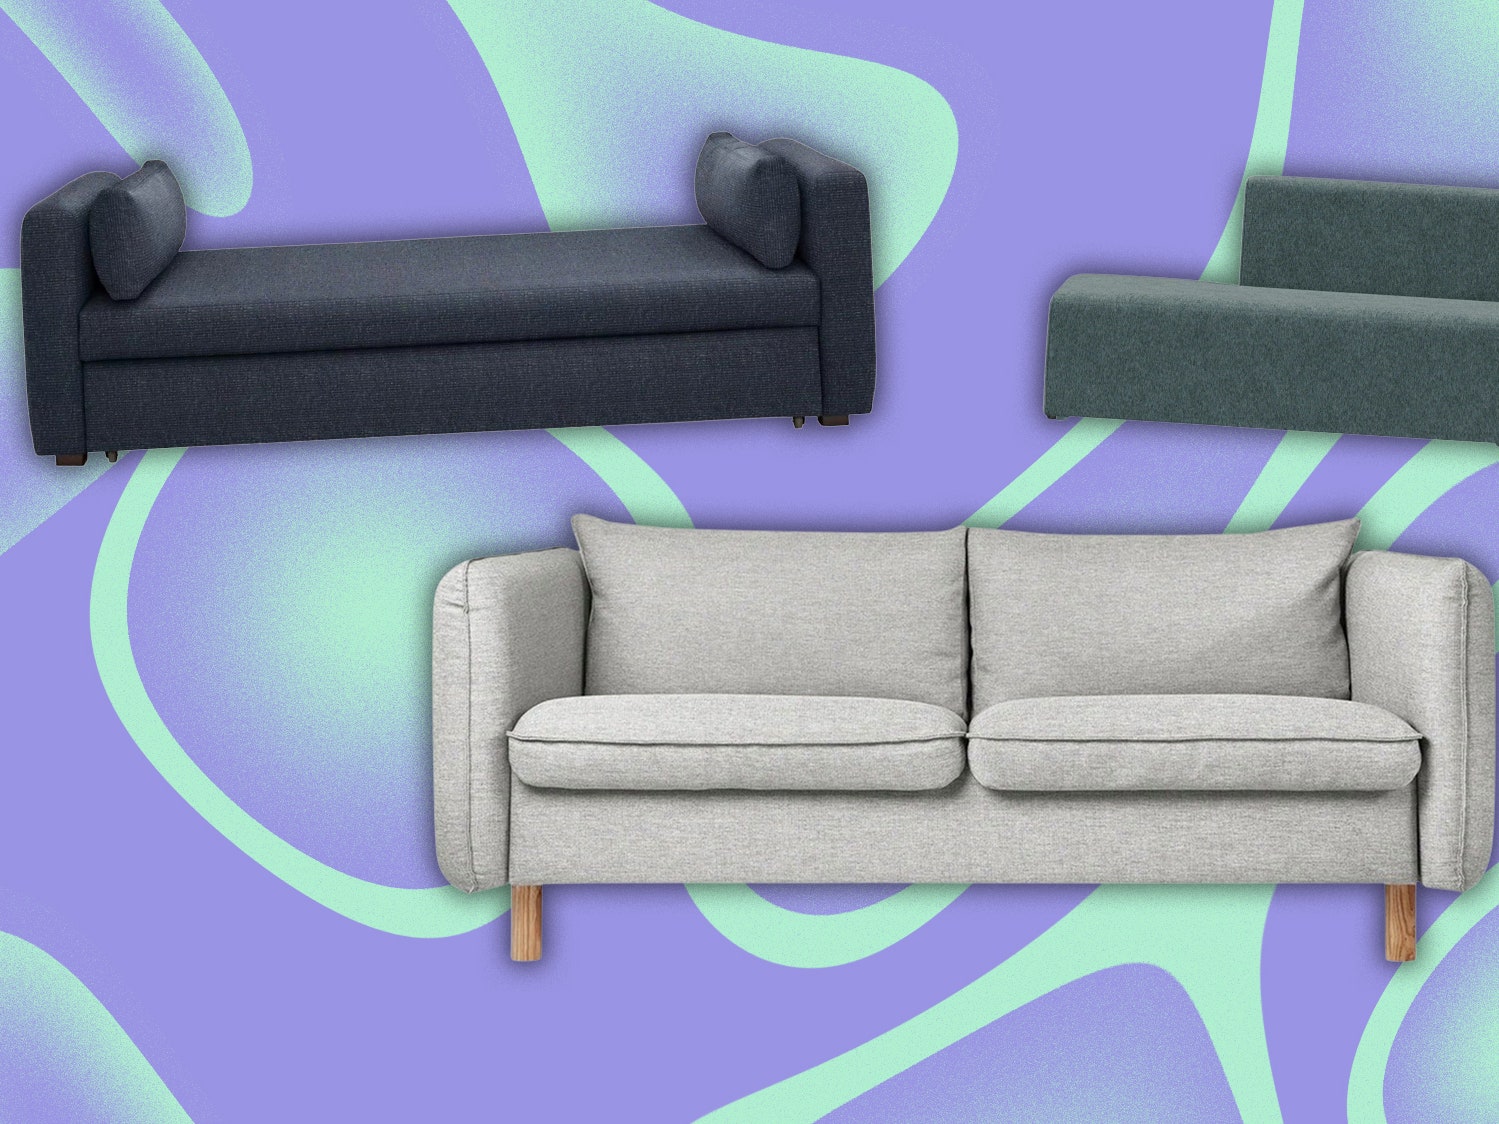 The Best Sleeper Sofas Are a Major Upgrade From Your Saggy College Futon